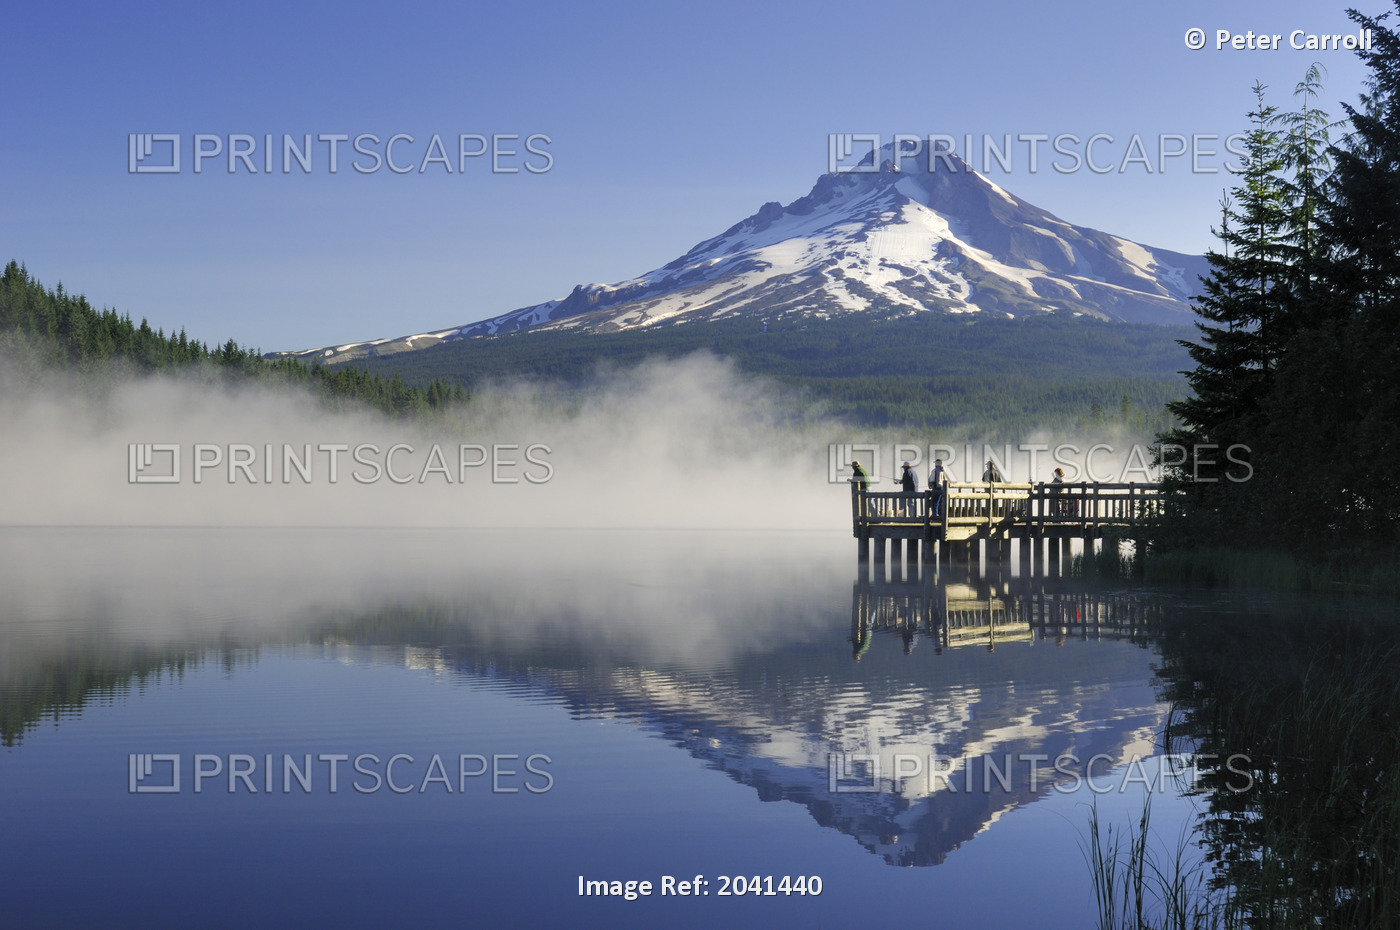 Fishermen Casting From A Dock On A Foggy Morning, Trillium Lake, Oregon